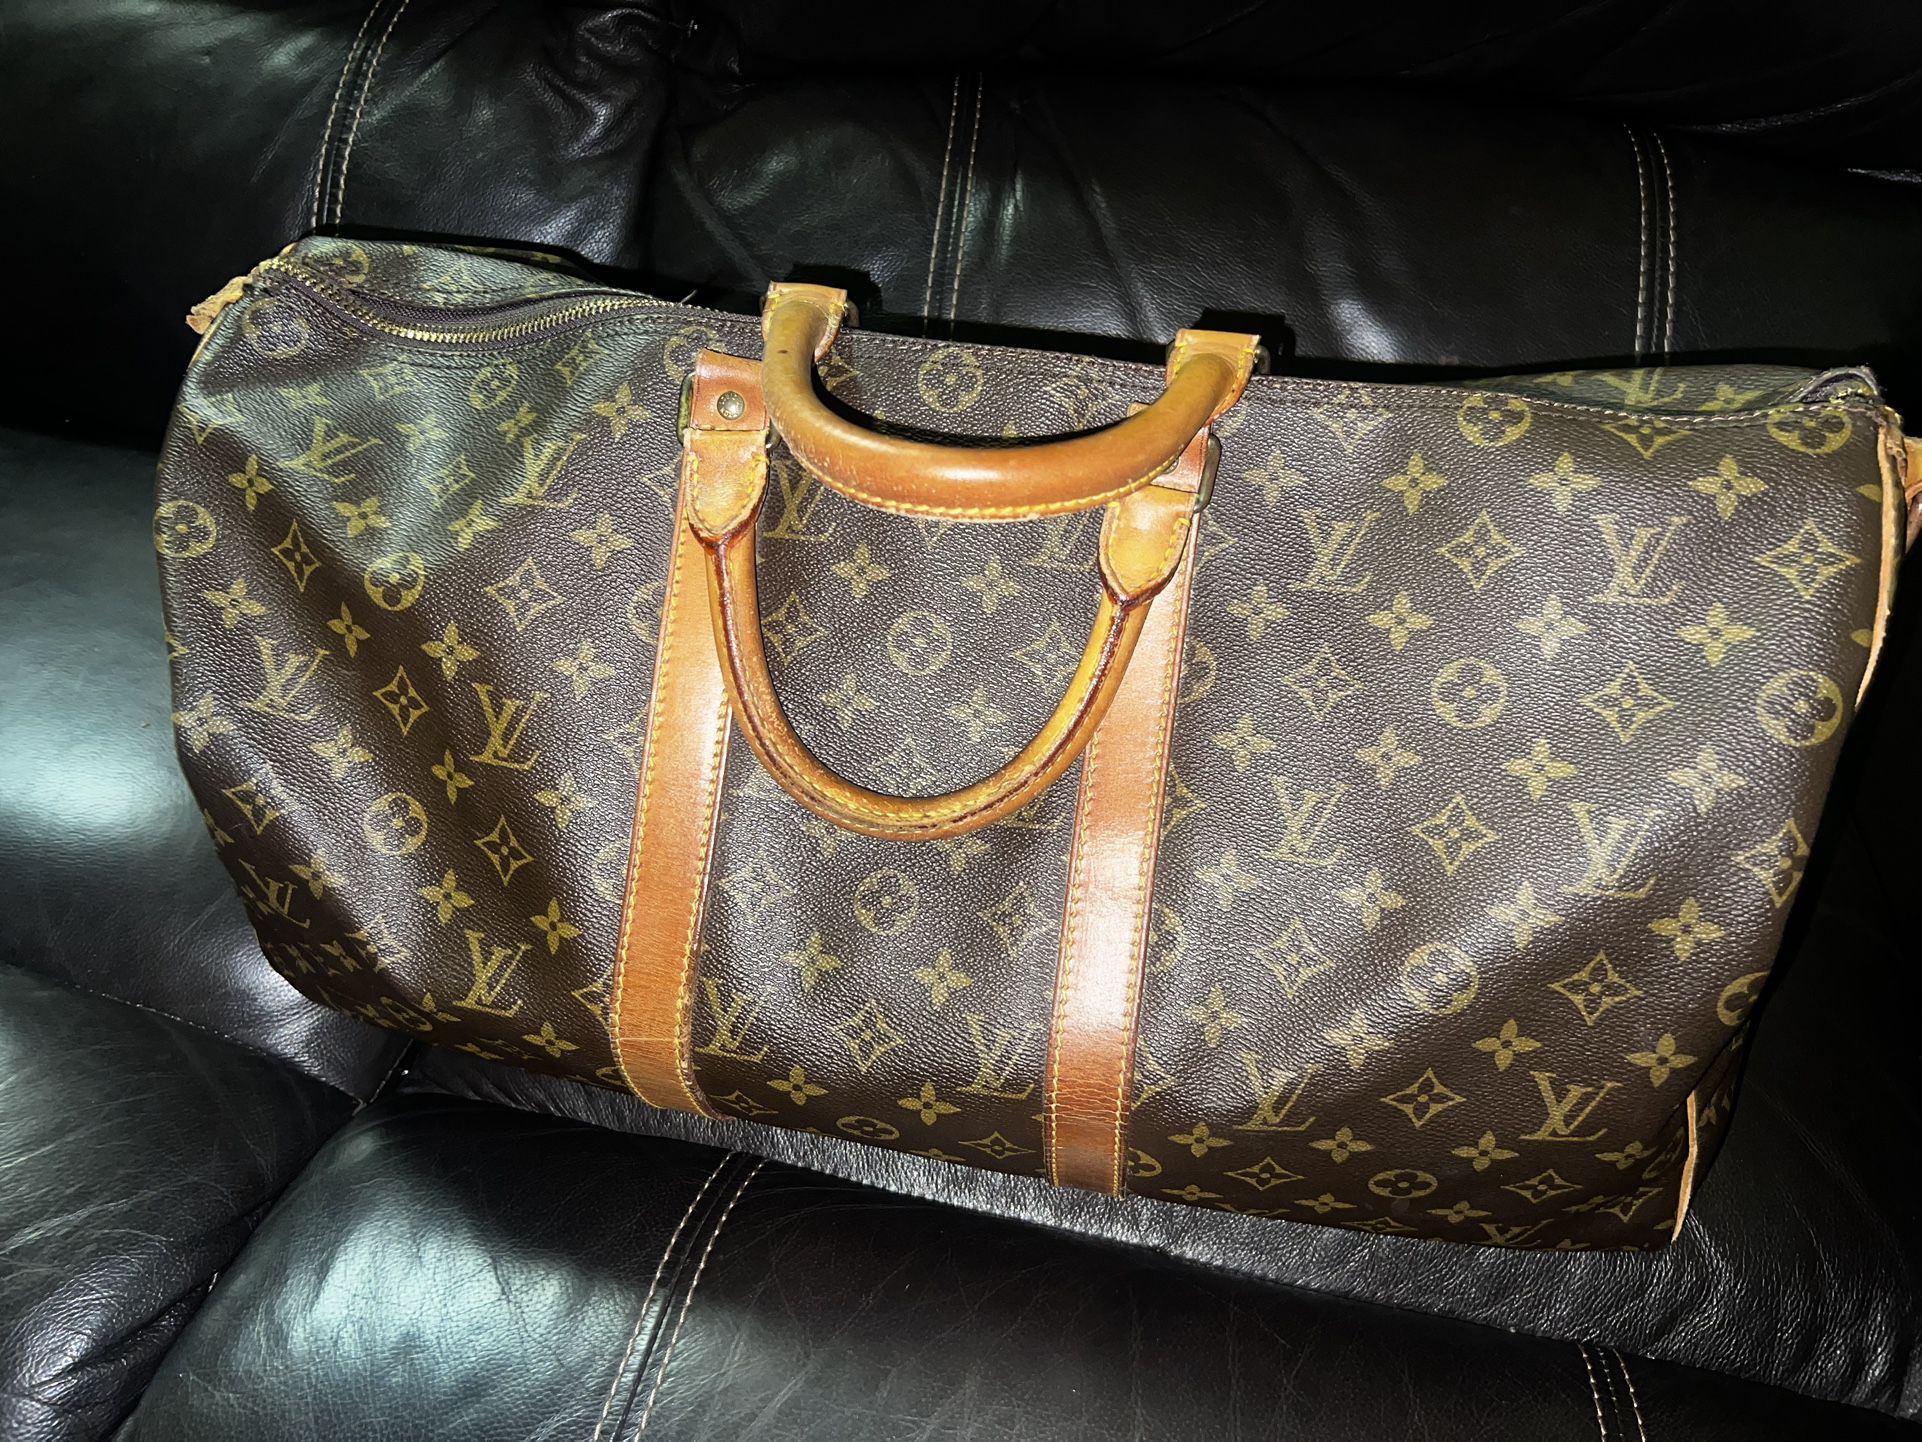 Louis Vuitton Keepall Bandoulière 50 Duffle Bag for Sale in New